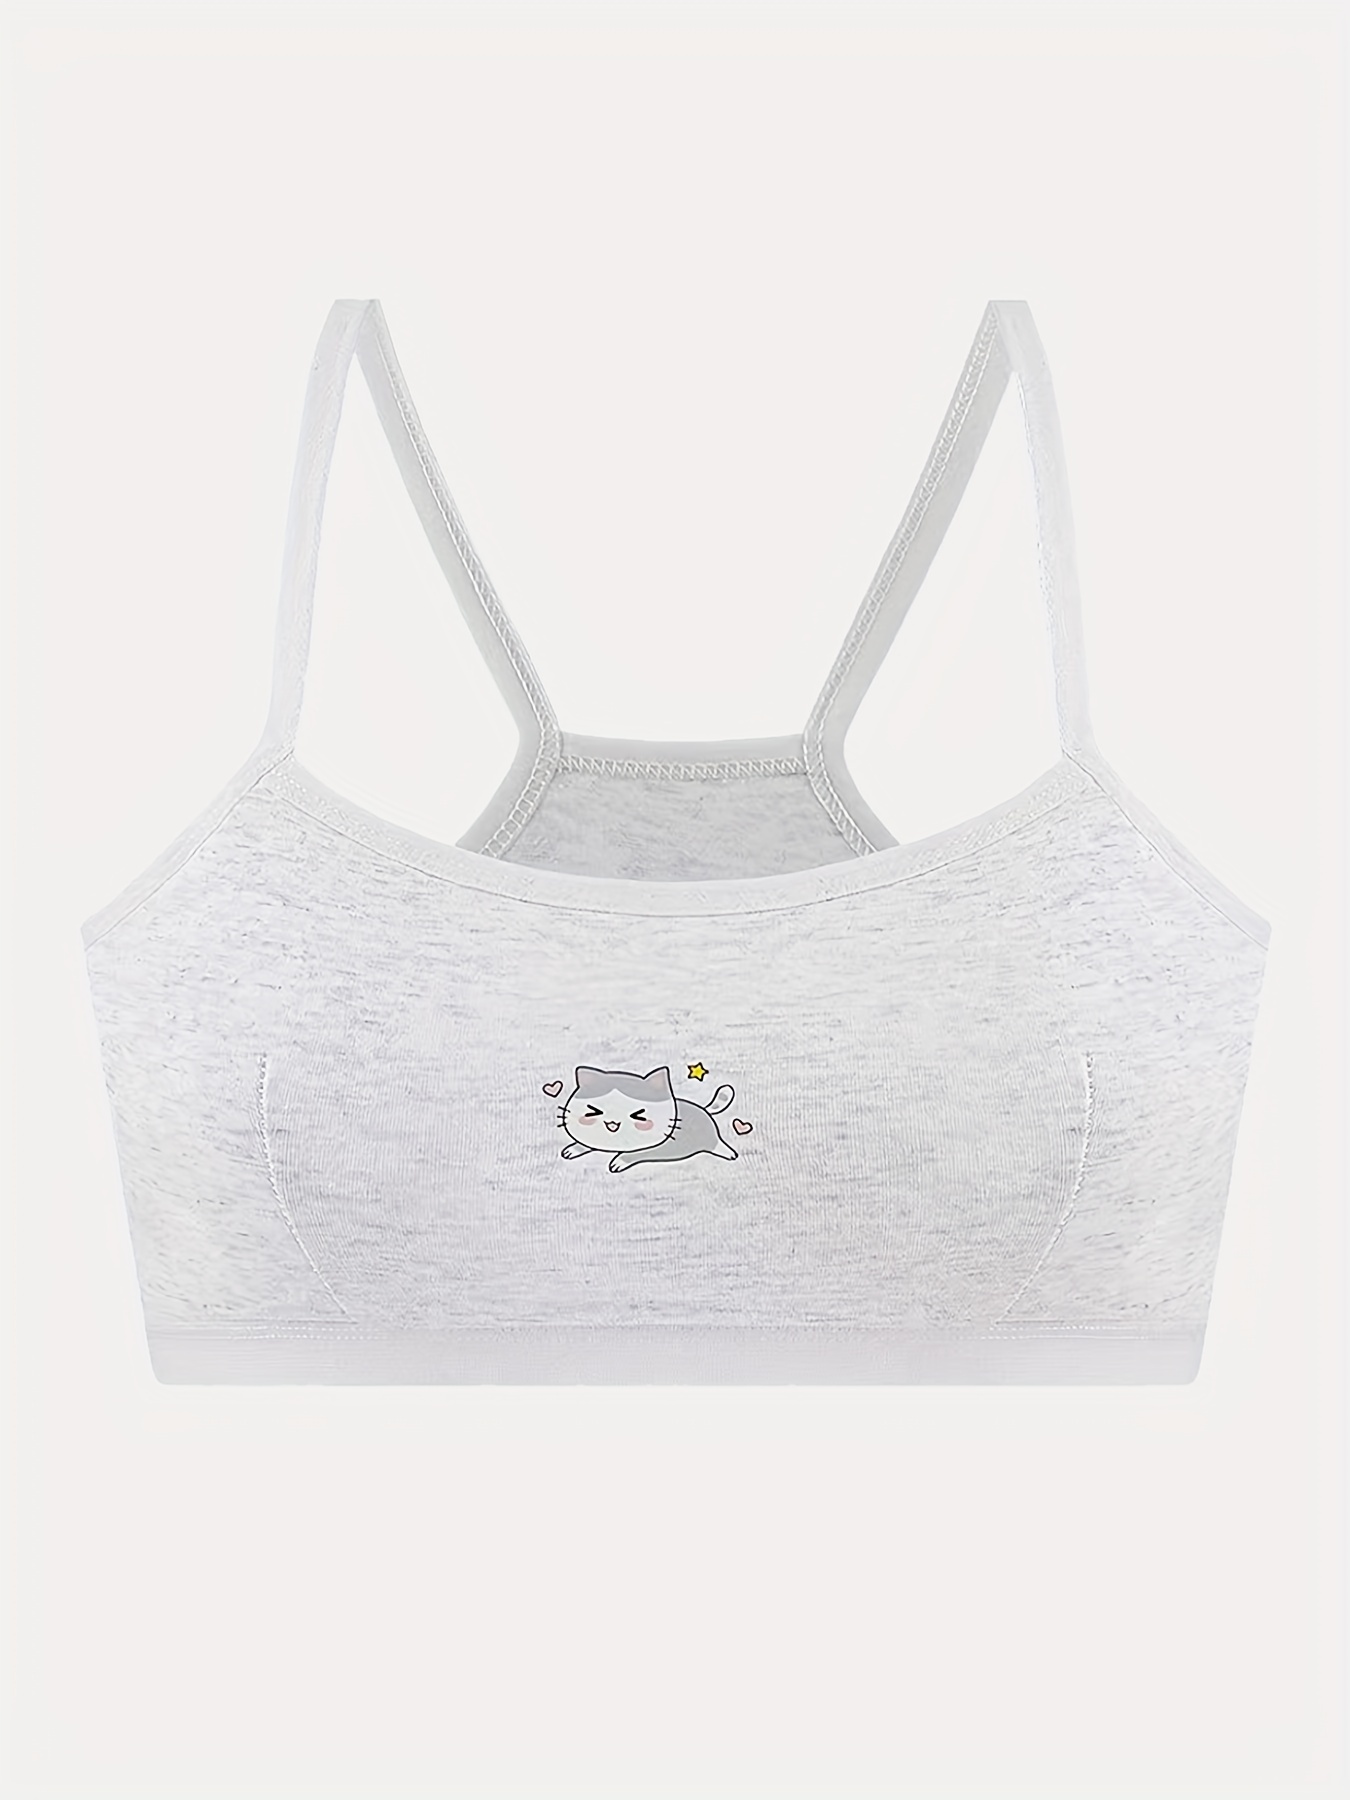 4pcs Girl's Bra, Cartoon Cat Print Underwear, 95% Cotton Breathable Comfy  Soft Bralette For Students Teens 7-14Y